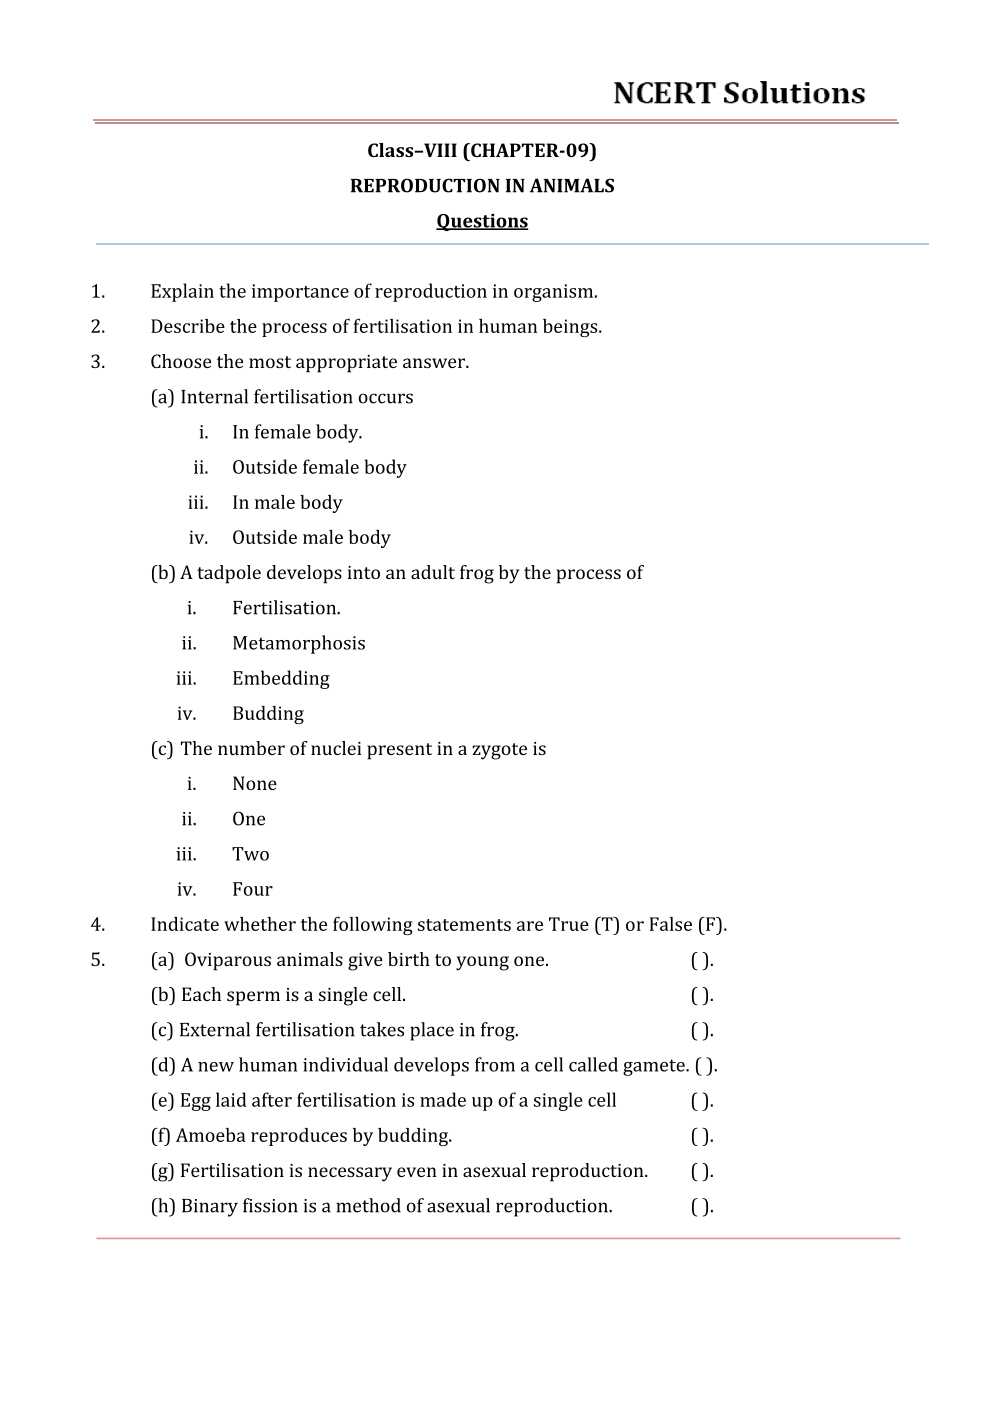 NCERT Solutions For Class 8 Science Chapter 9 